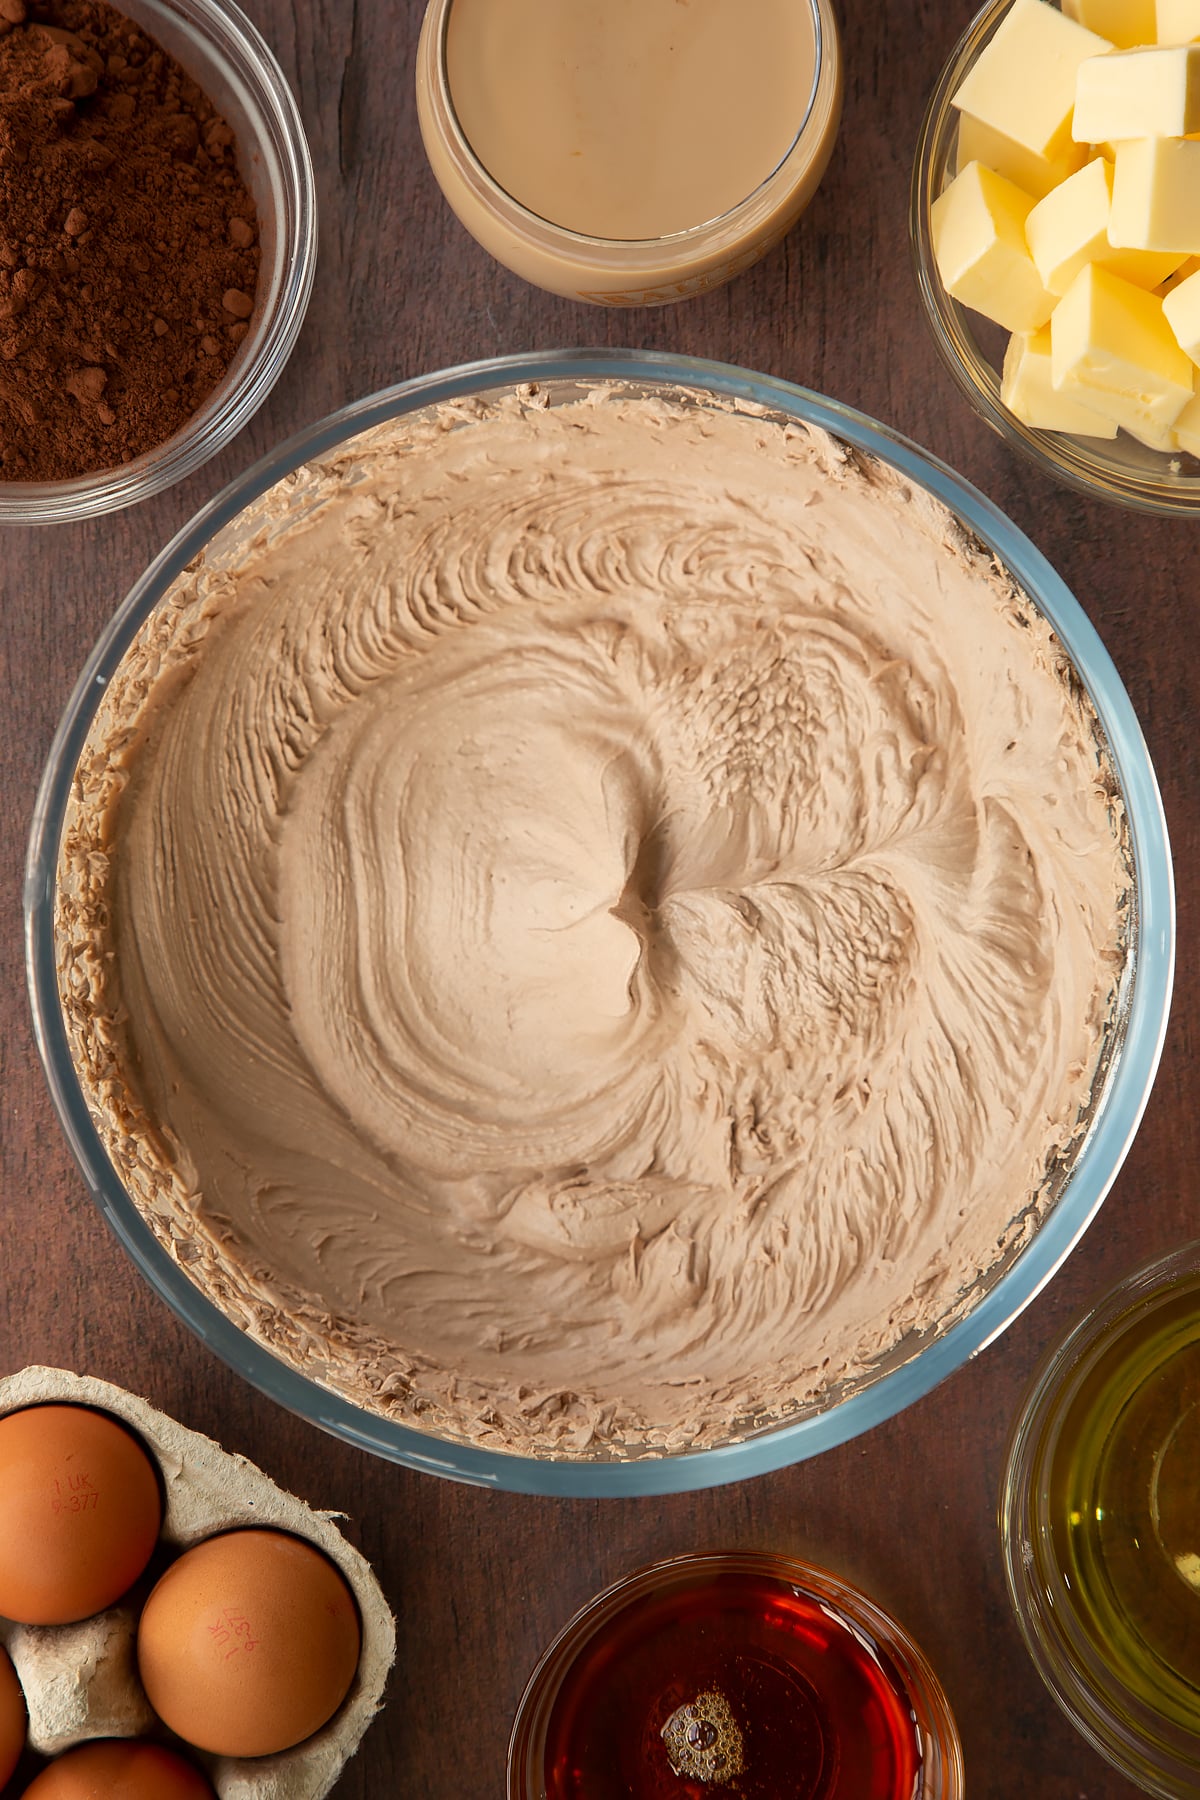 Baileys buttercream icing in a glass mixing bowl. Ingredients to make a Baileys cake surround the bowl.